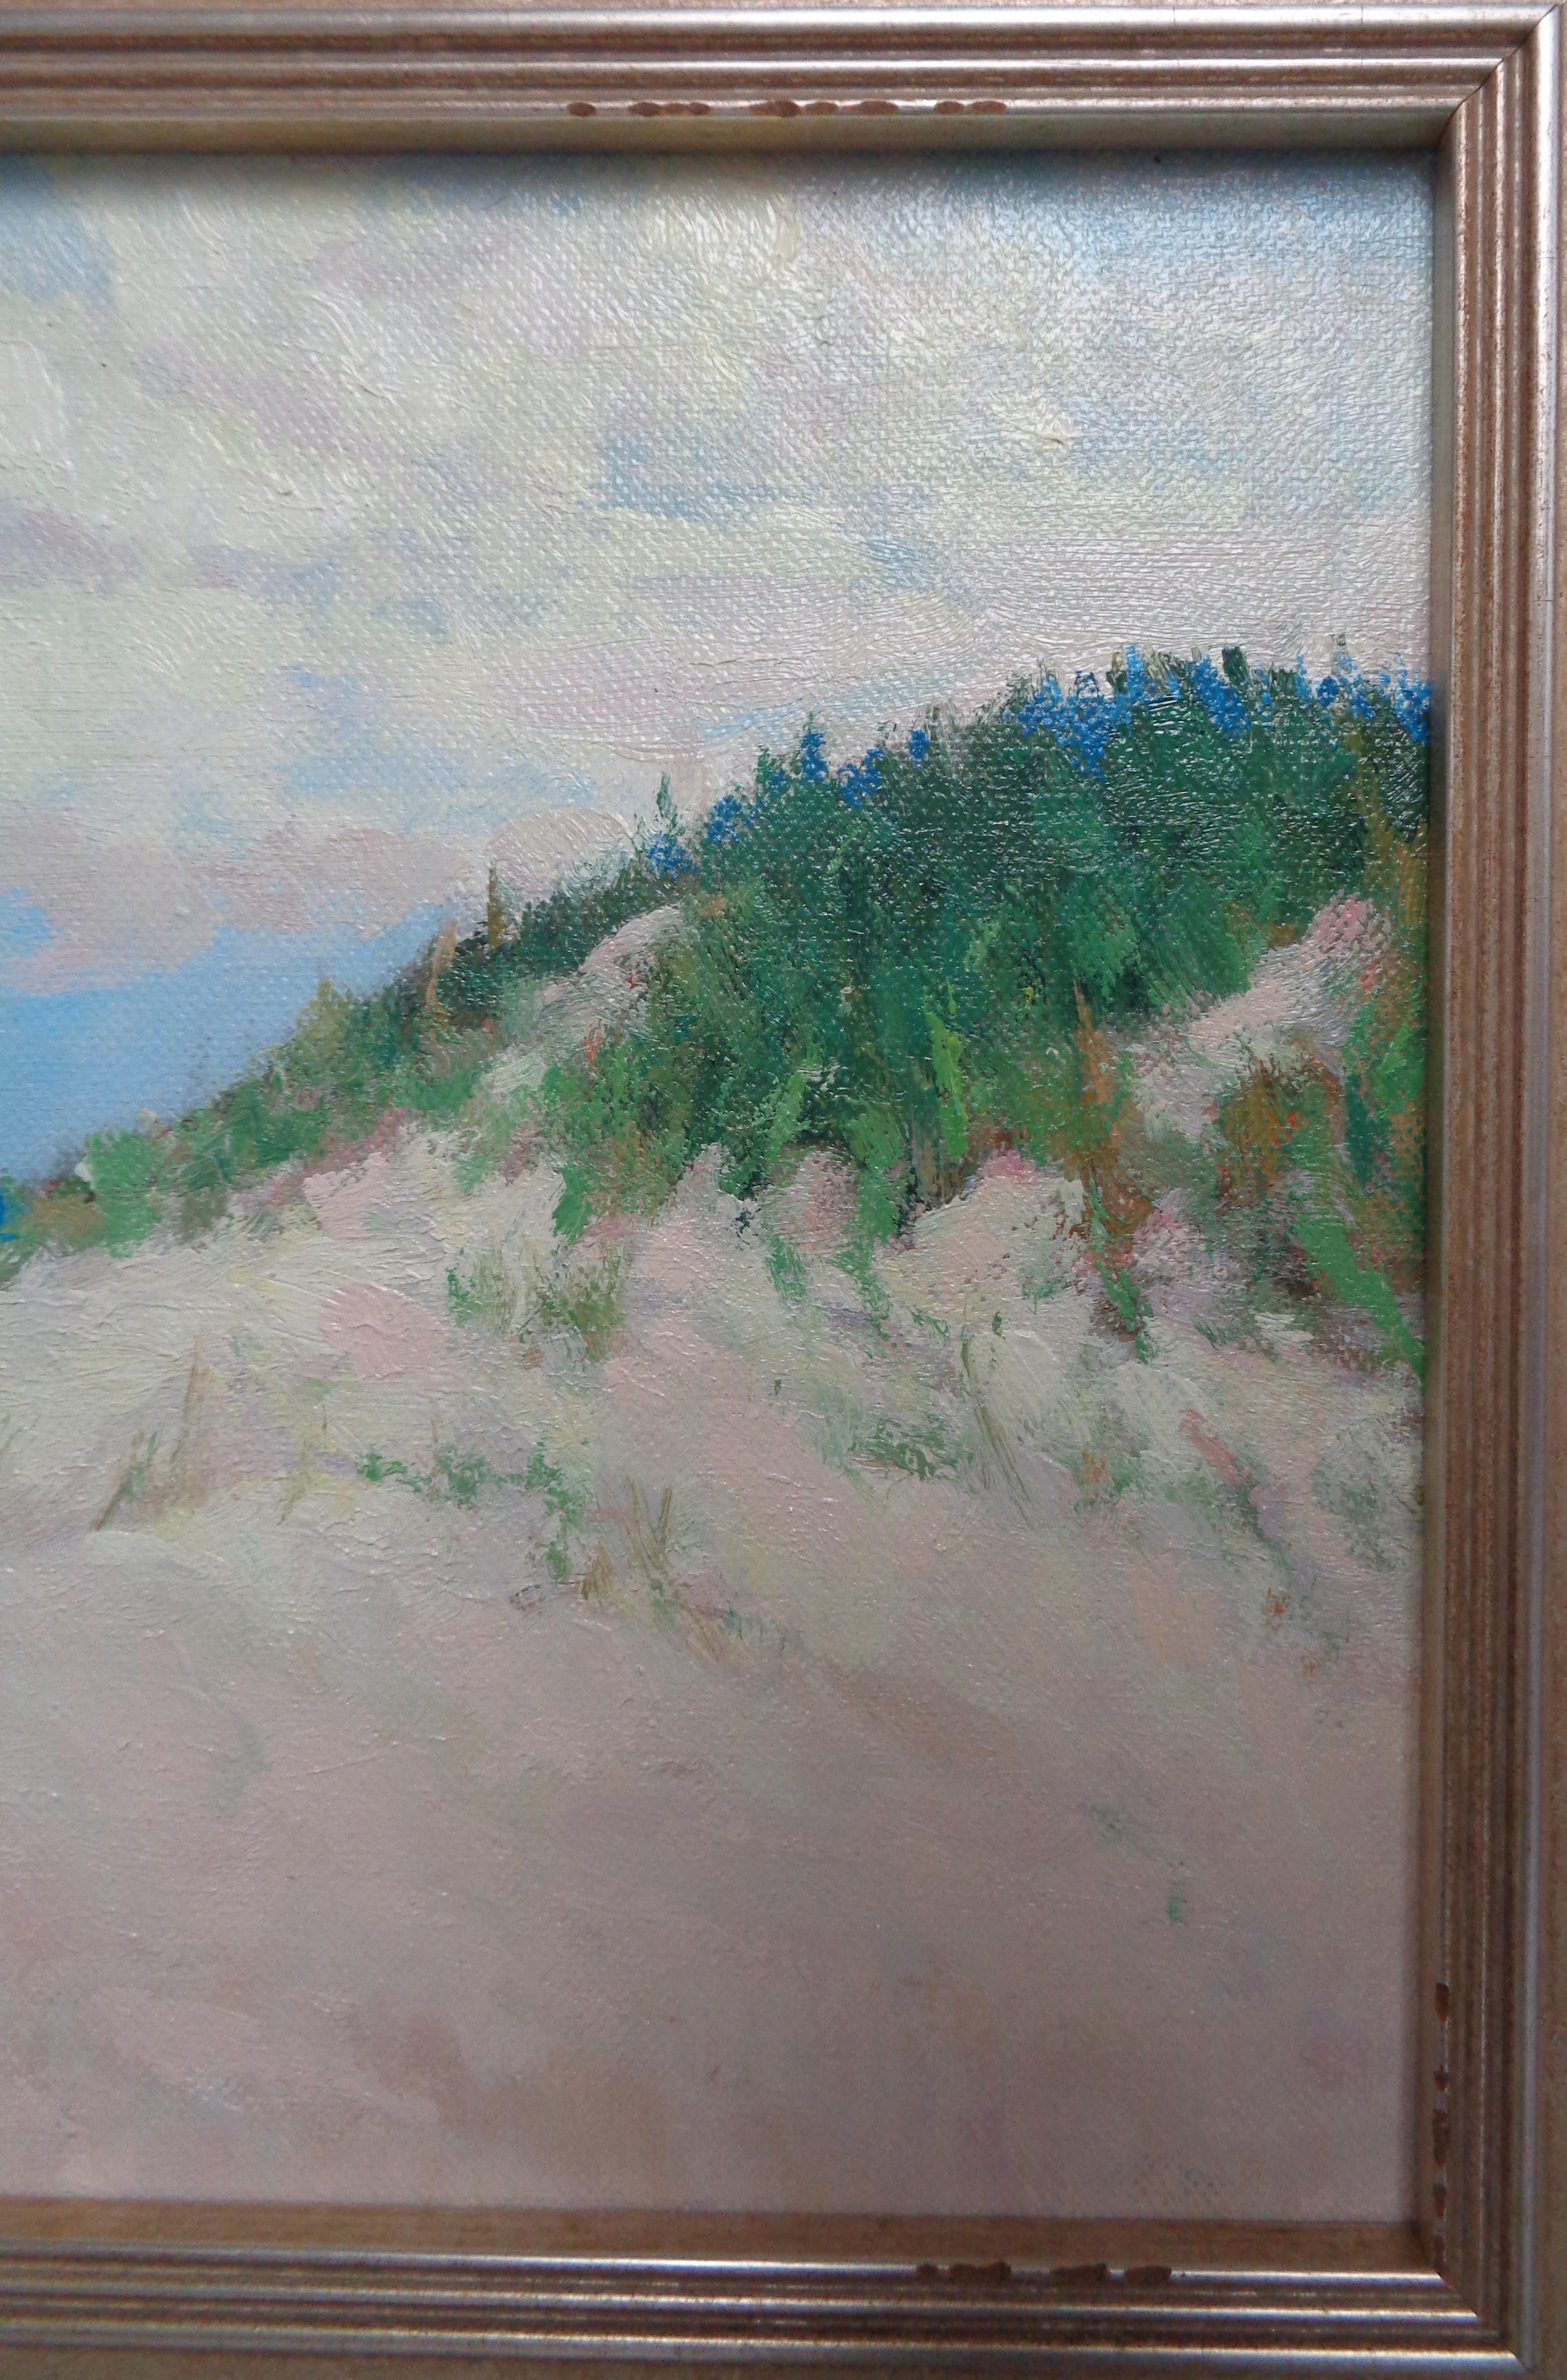 Beach & Ocean Impressionistic Seascape Oil Painting Dunes by Michael Budden For Sale 4